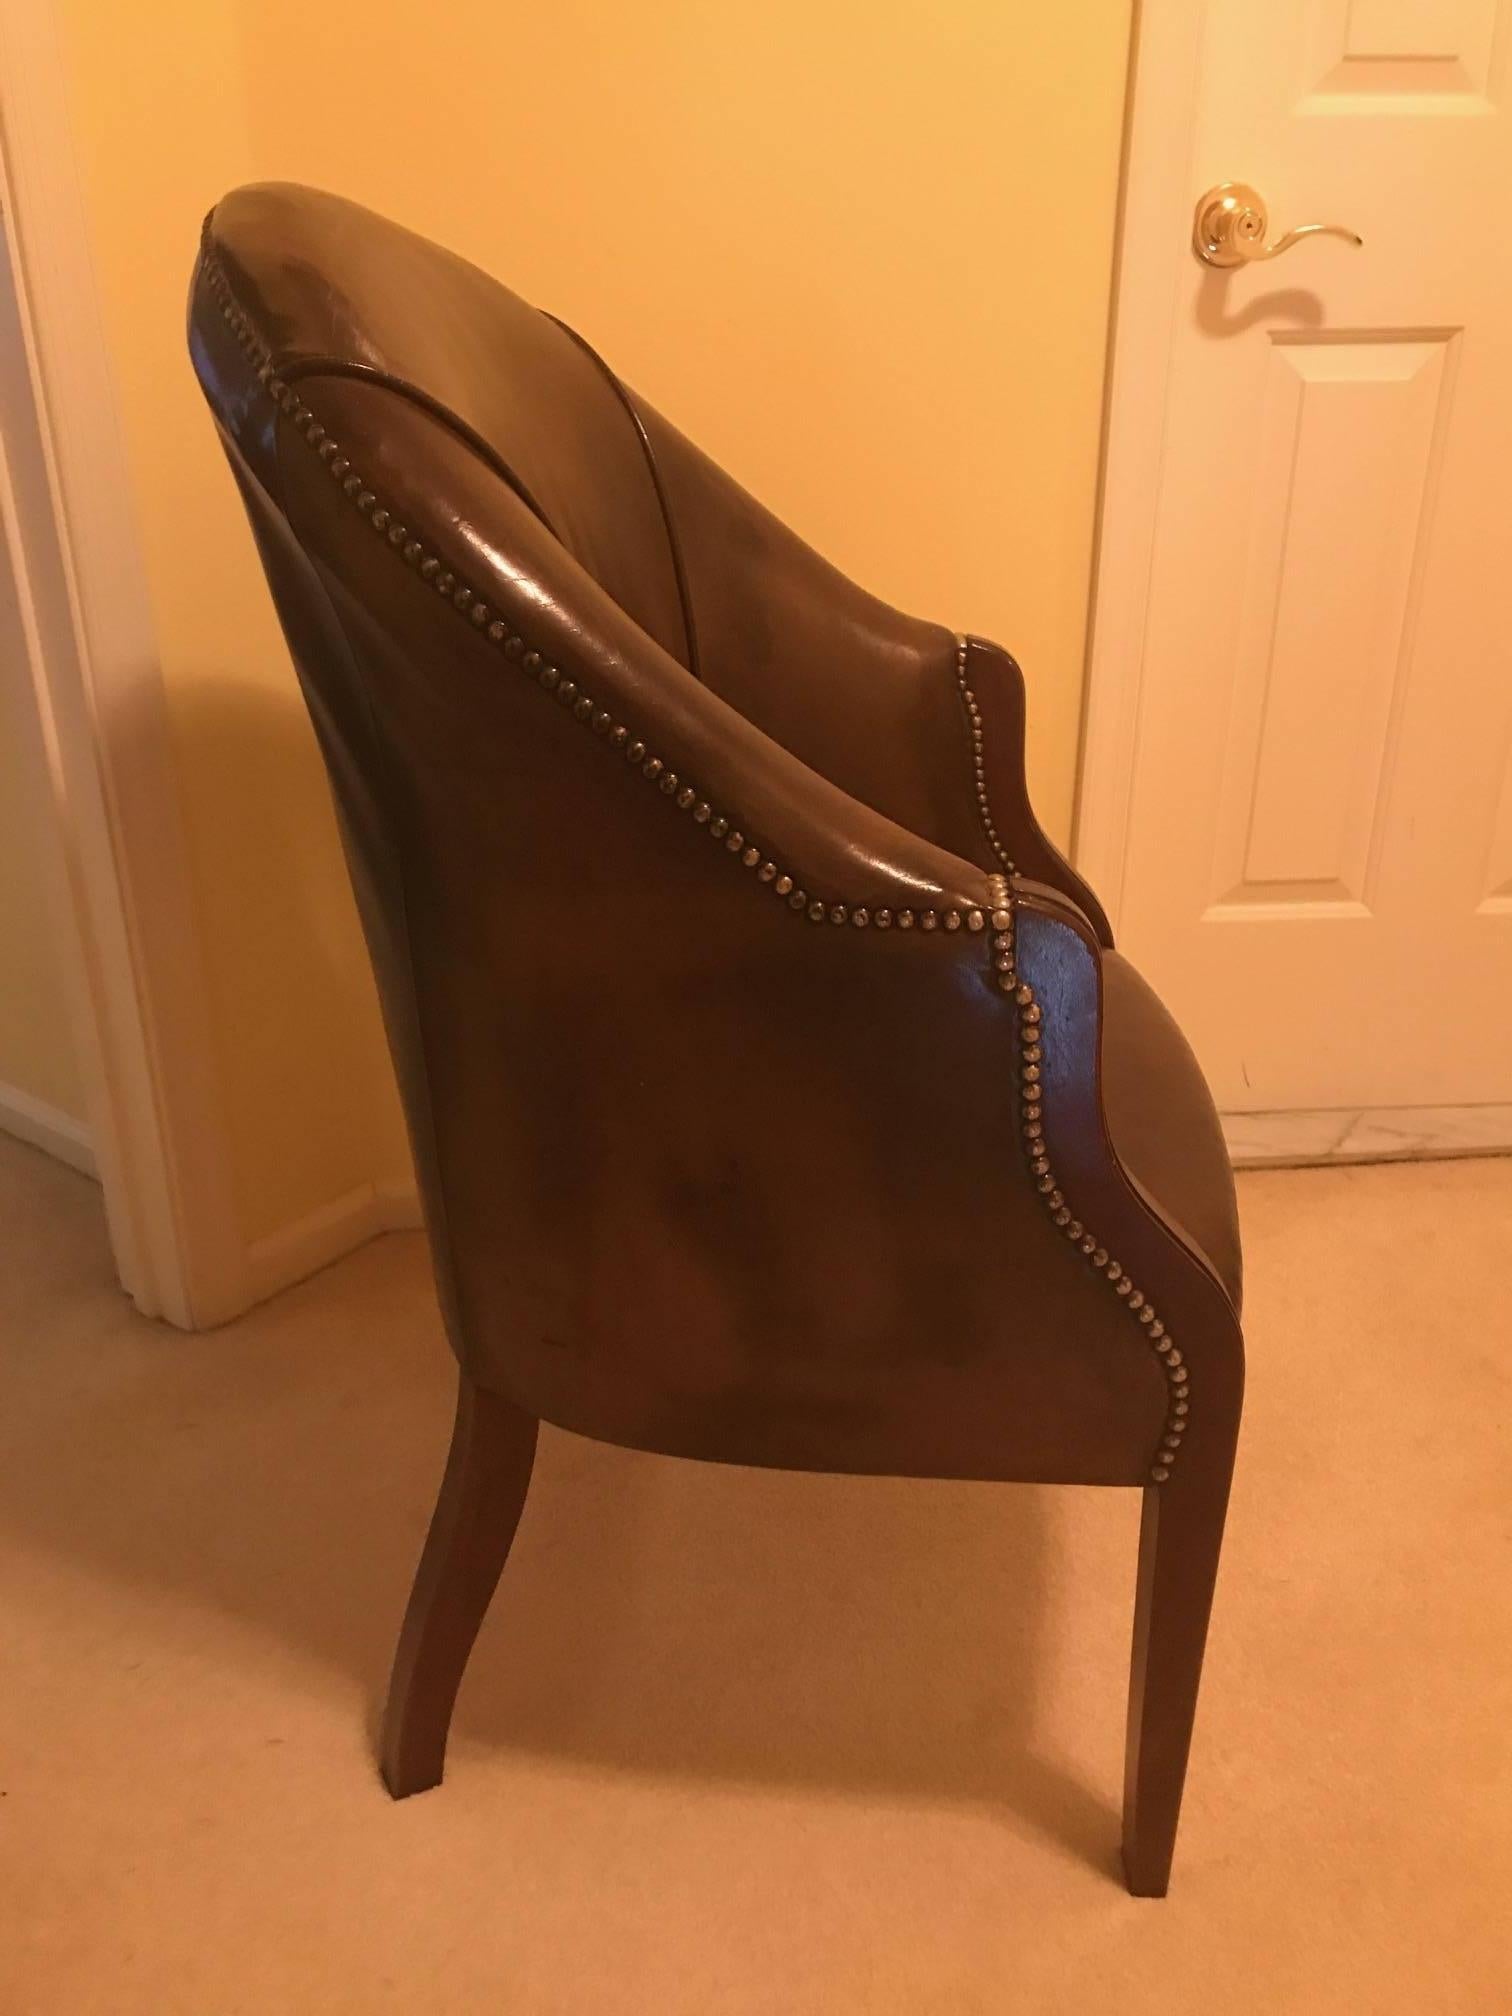 Diminutive English leather library chair with mahogany frame and brass nailhead trim. The attached seat and back in a dark olive brown leather. The leather has some creasing but has not tears. The scale is meant for a smaller person.